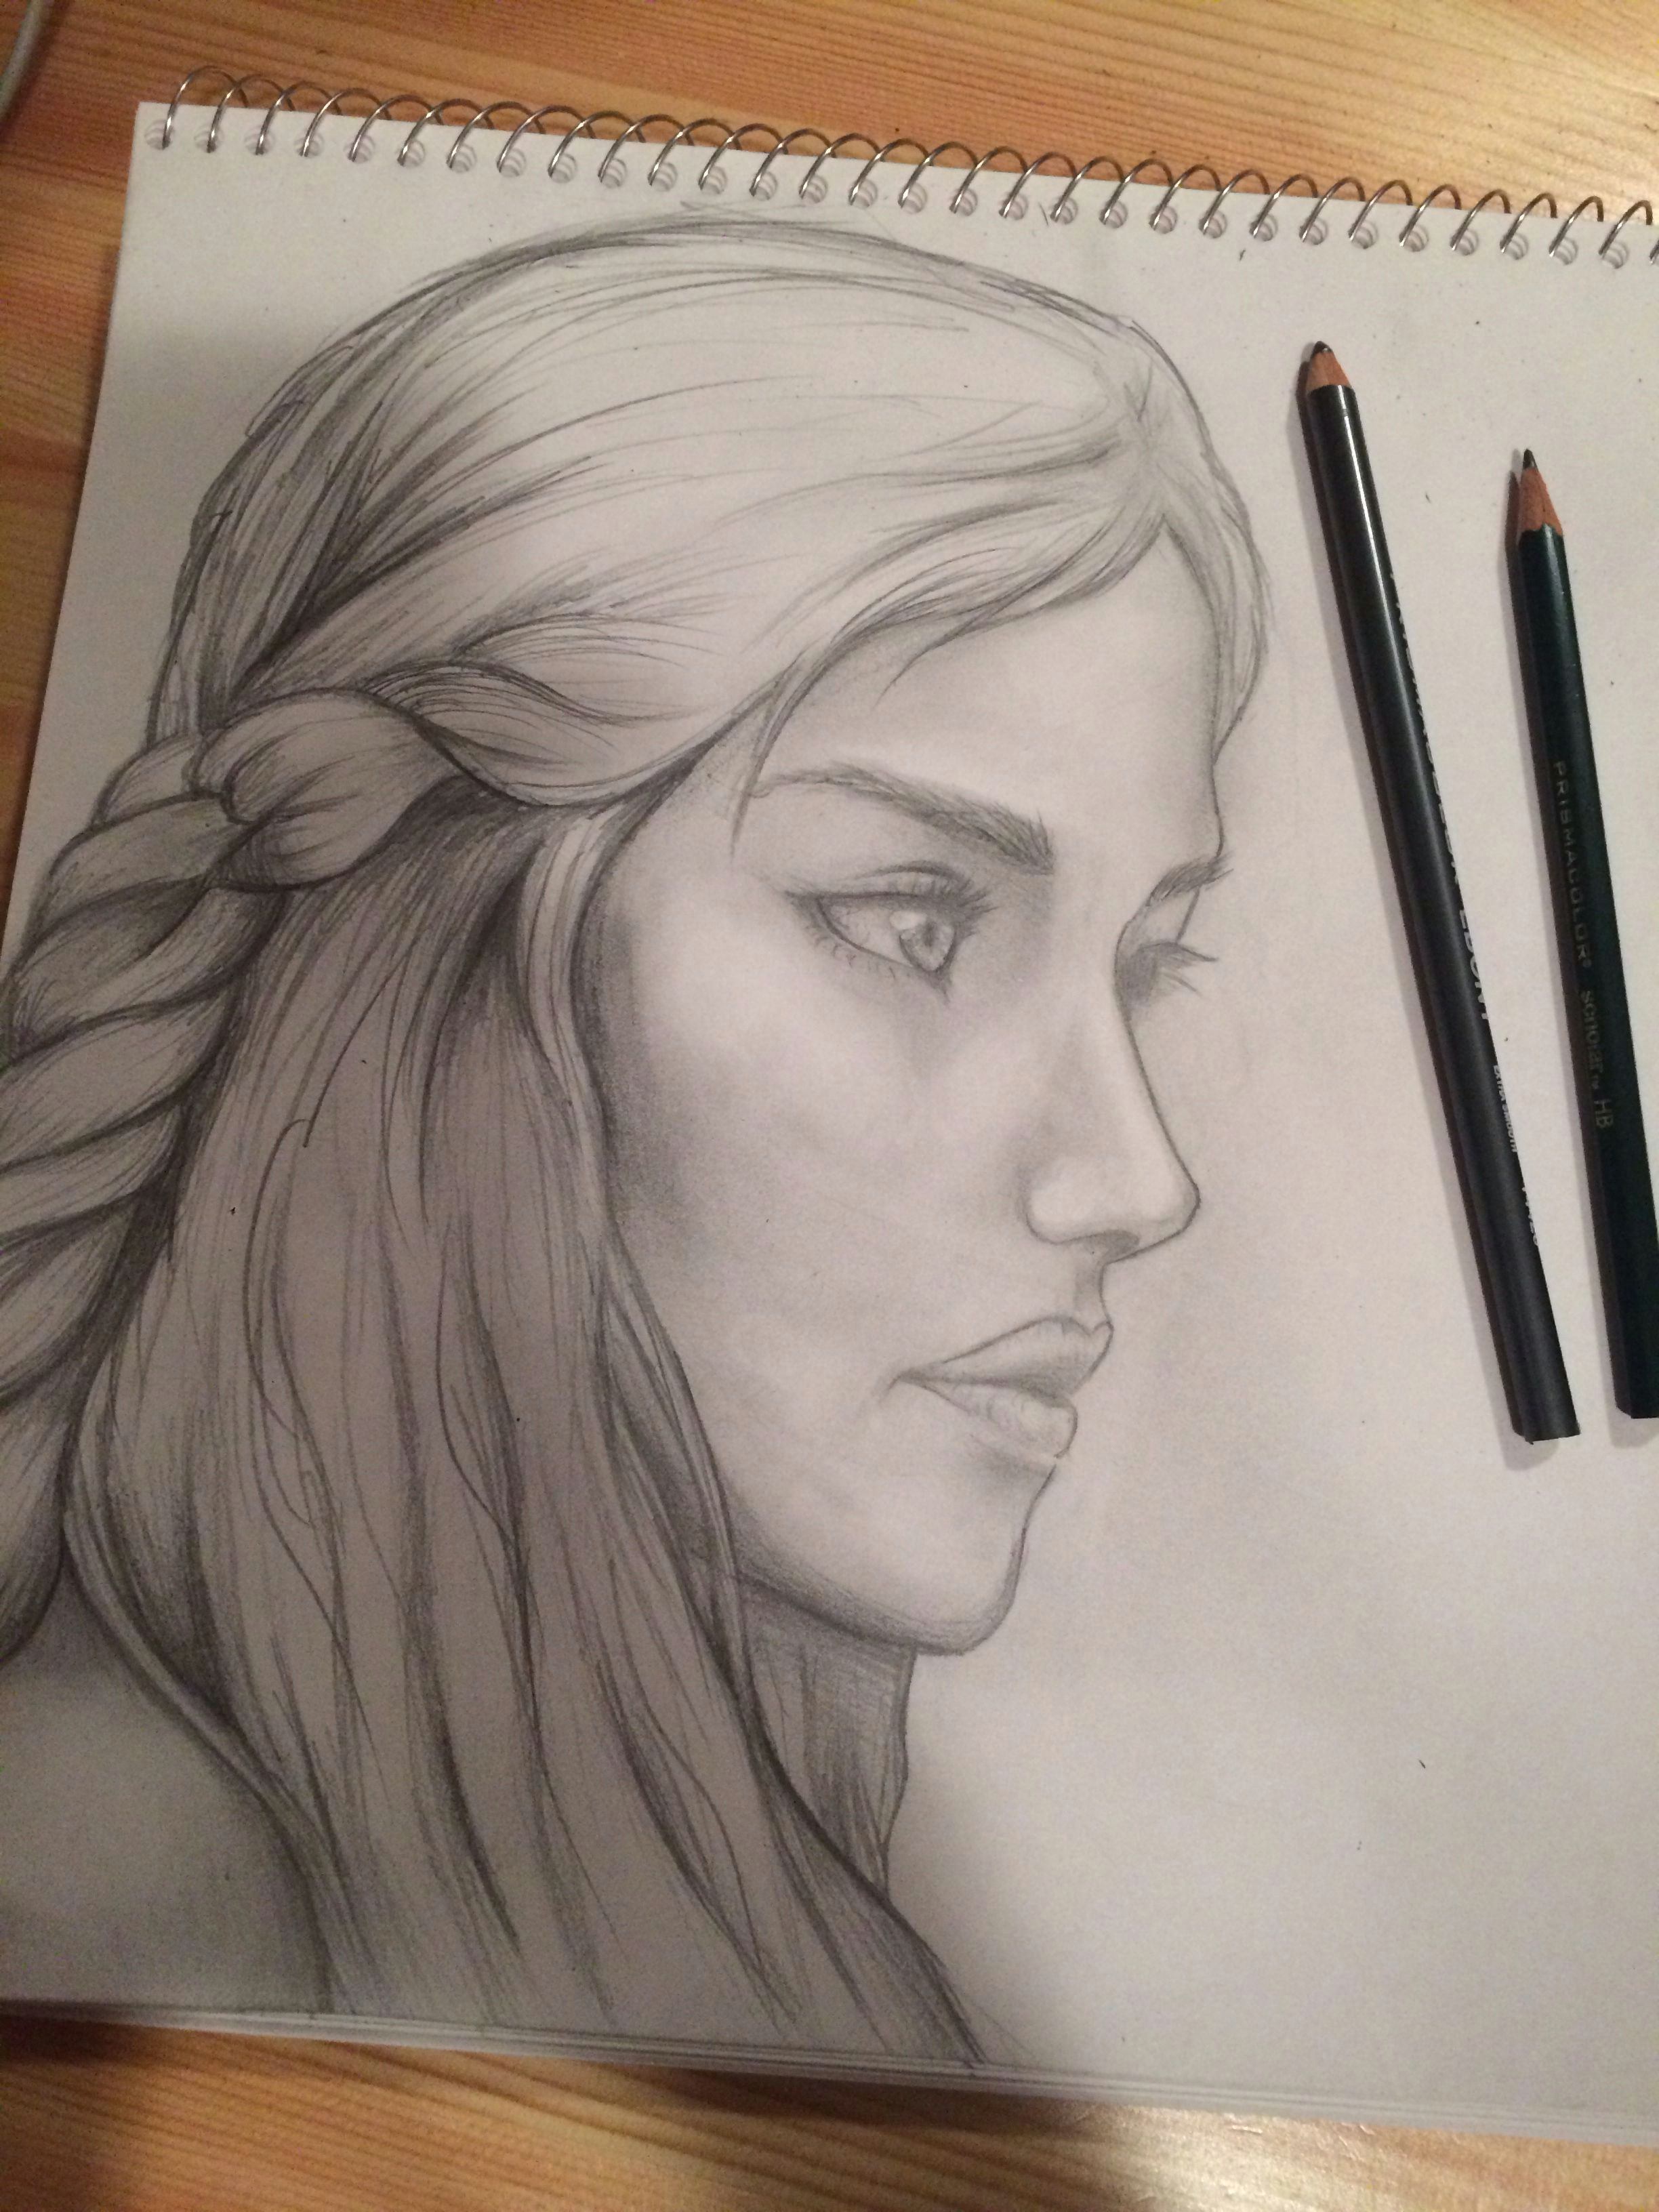 almost done my pencil portrait of the dragon queen from game of thrones